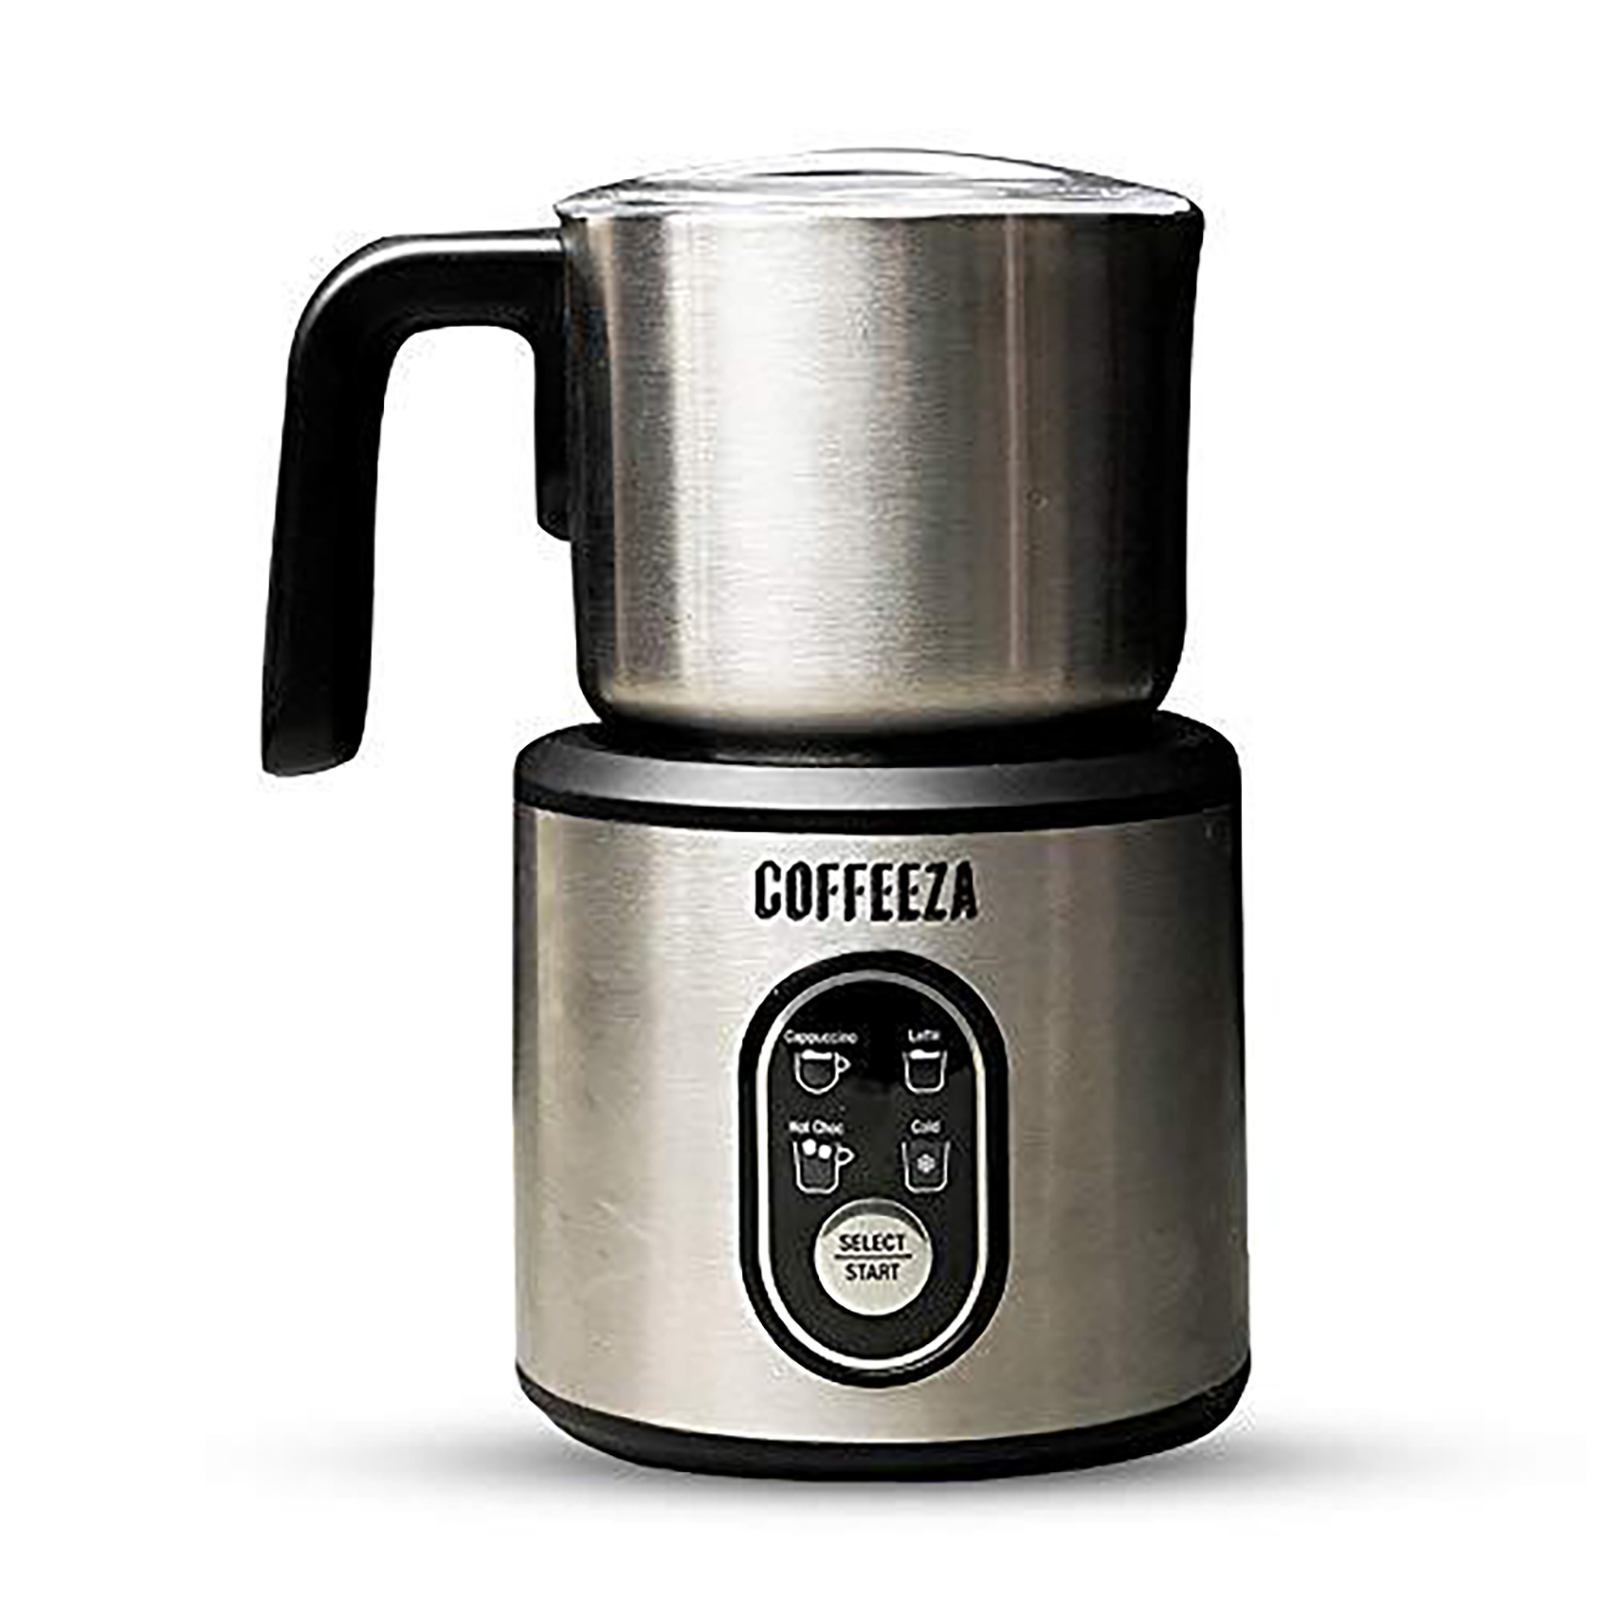 Coffeeza - Coffeeza Frothimo Automatic Milk Frother & Heater (Makes Cappuccino, Latte & Milk Frothing, Auto-Off Function, MF-FRO1, Silver)